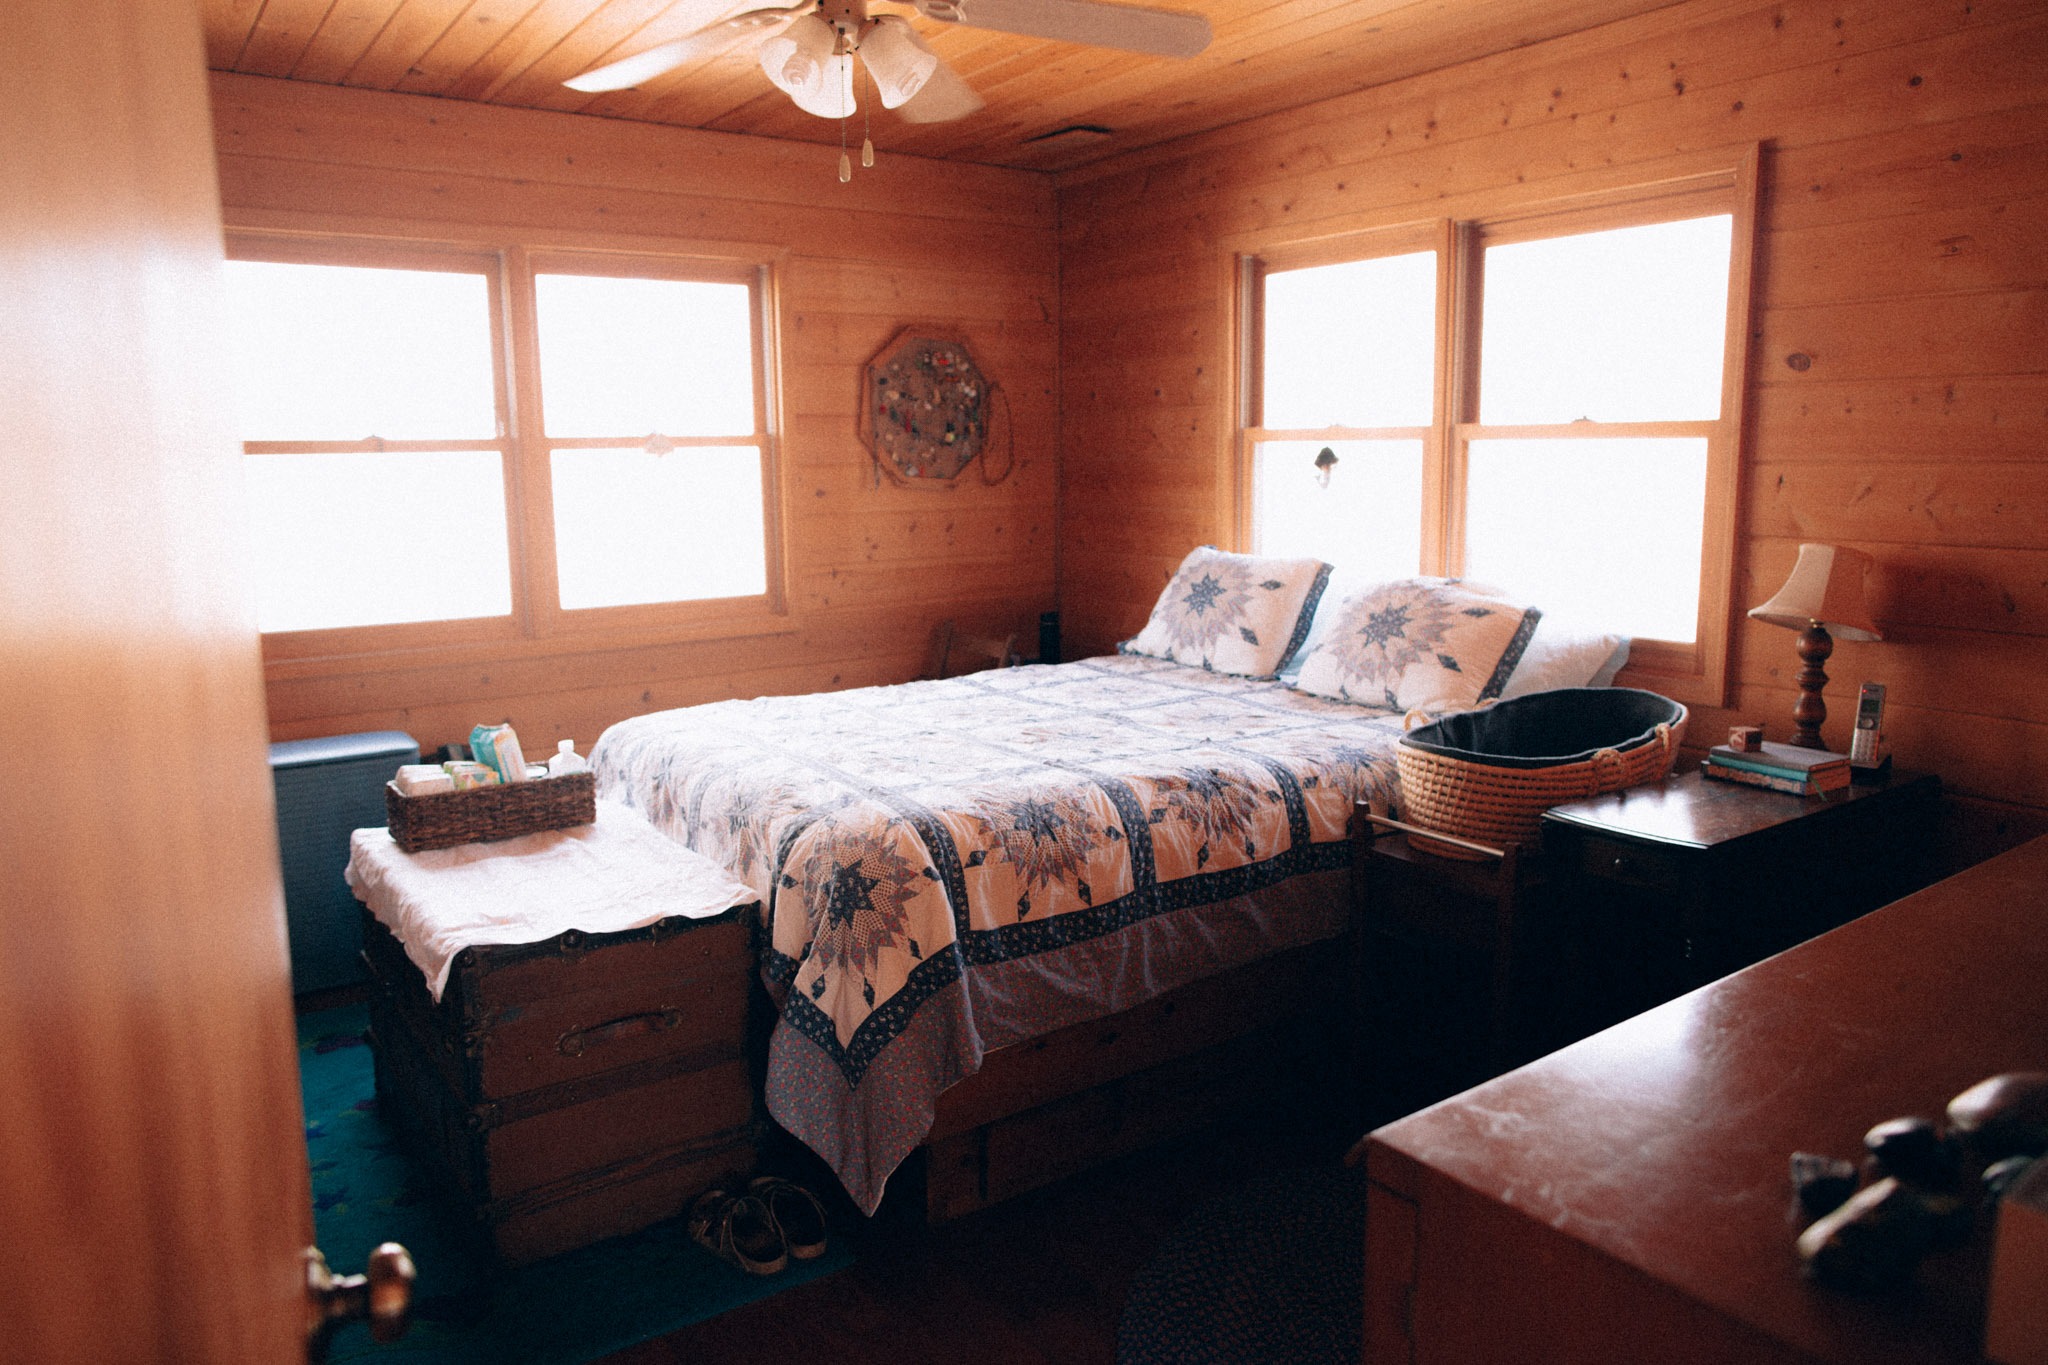 The bedroom at the birthing cabin